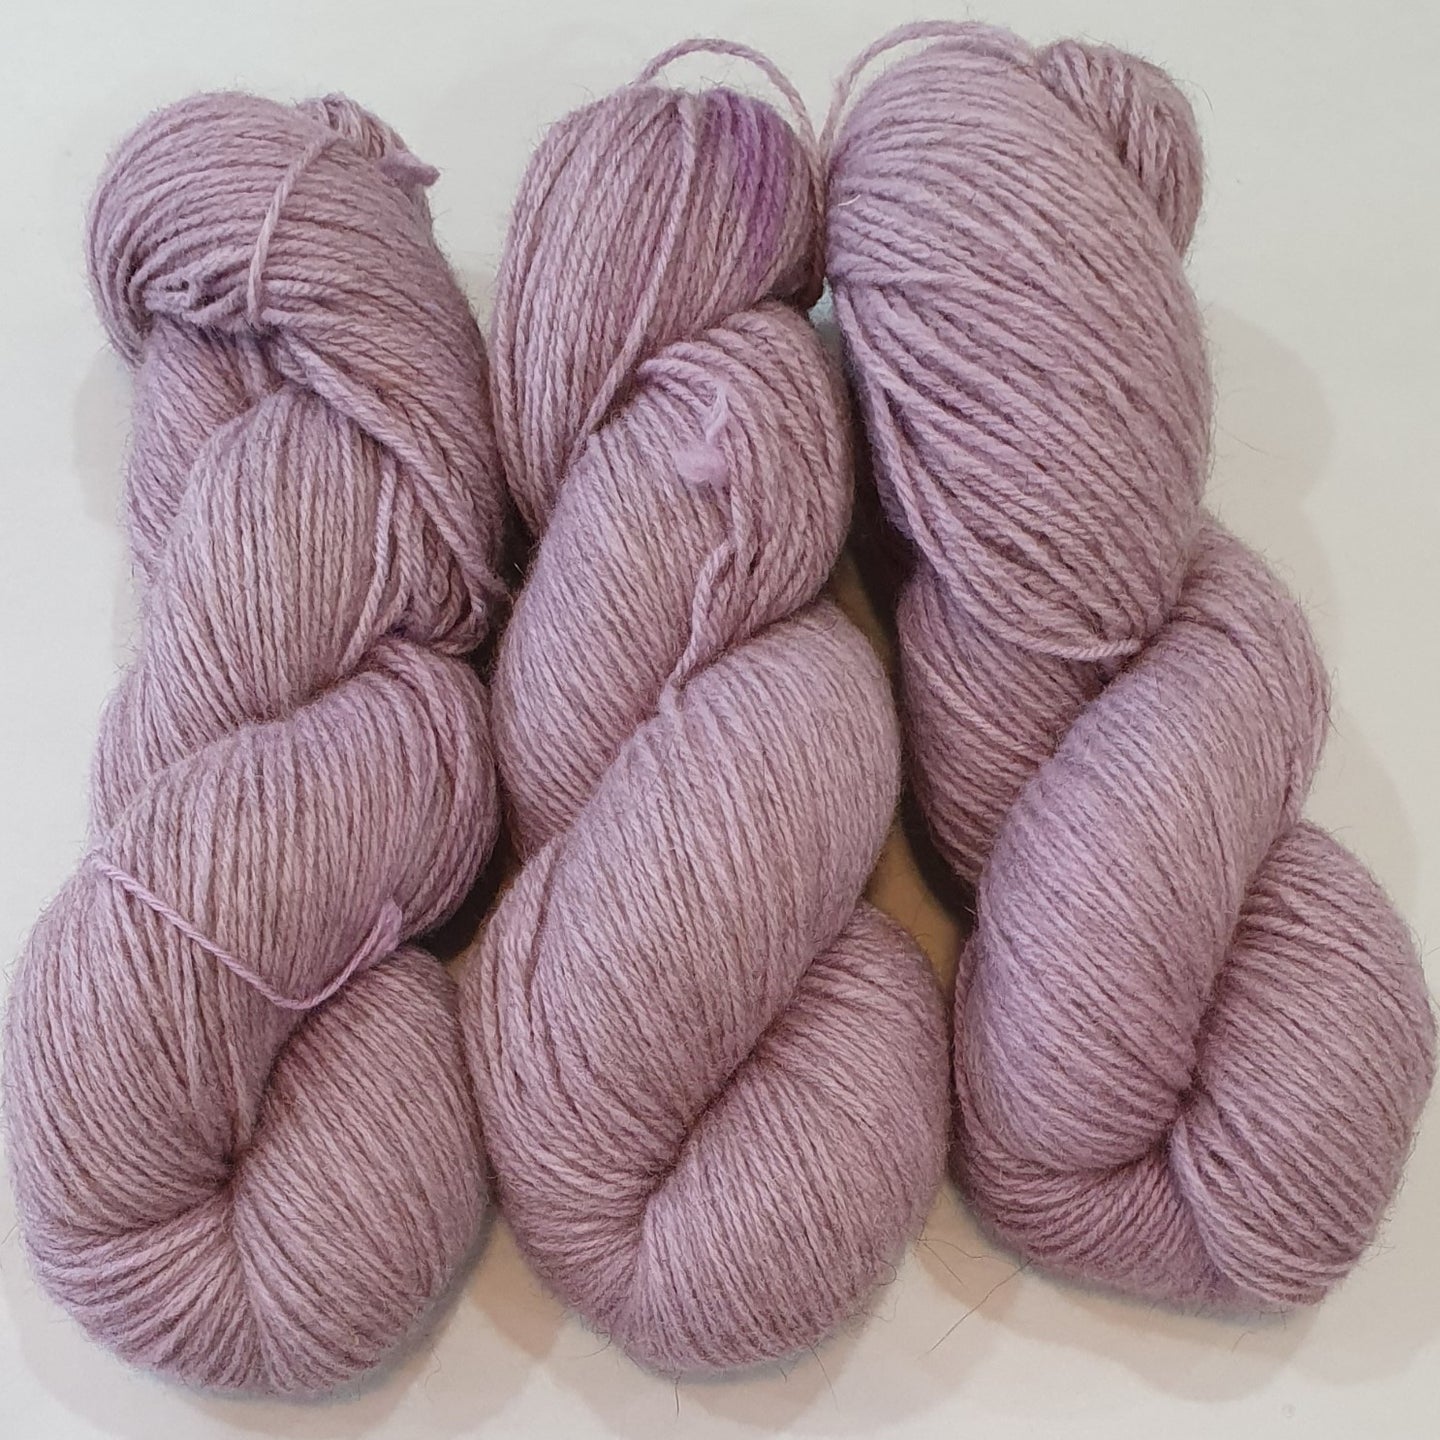 Hint Of Lavender (Baby Yeti 4ply)